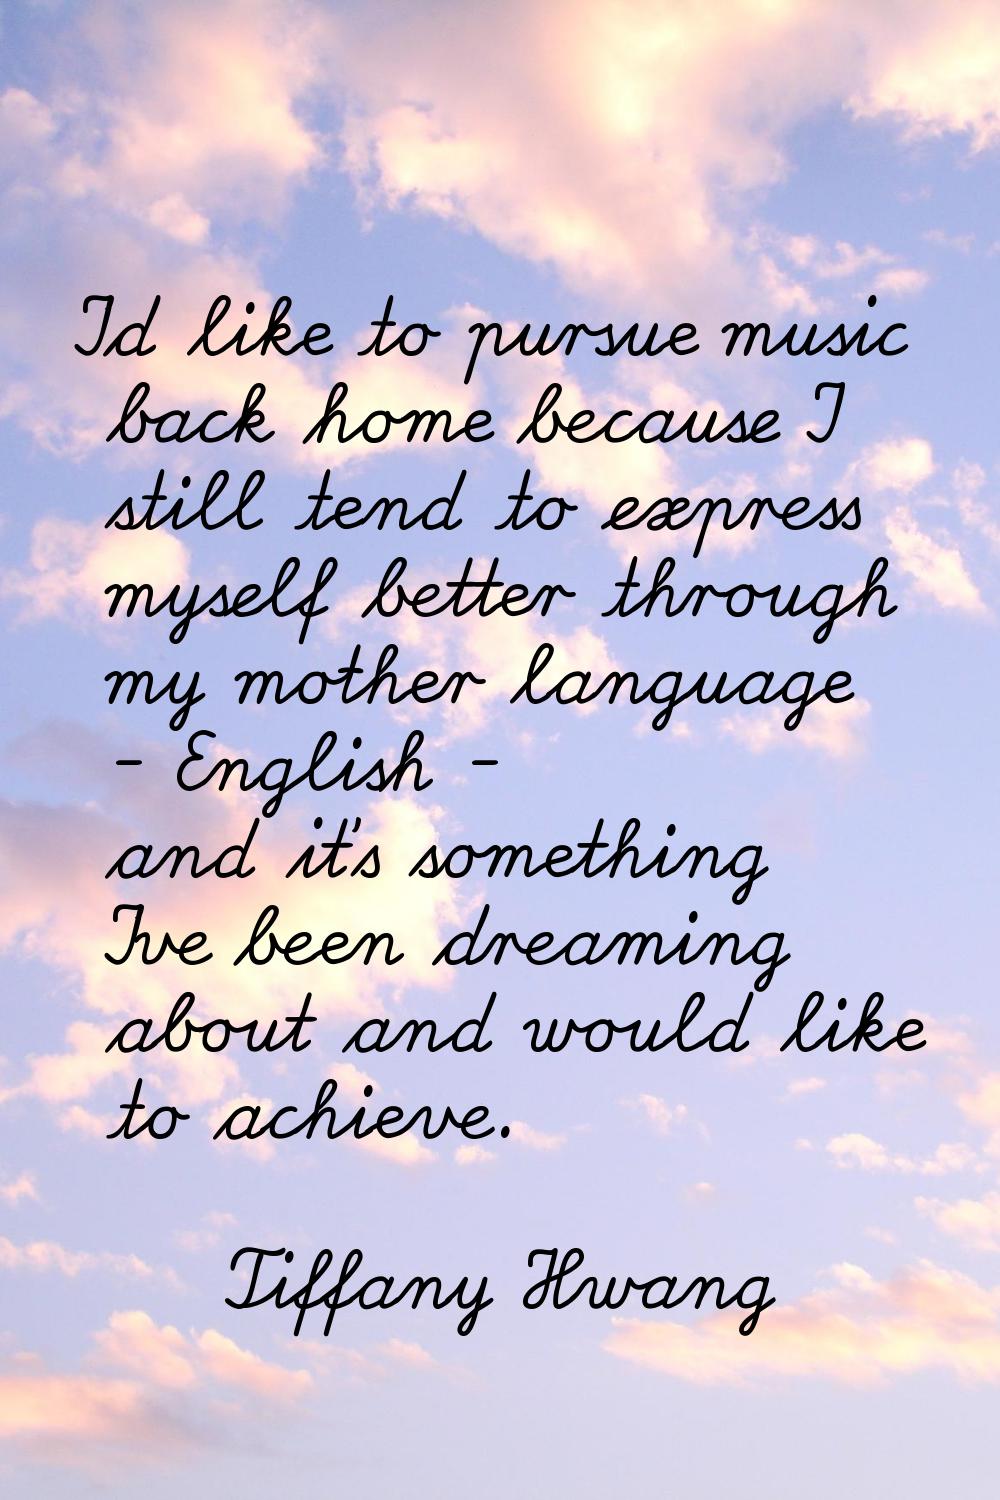 I'd like to pursue music back home because I still tend to express myself better through my mother 